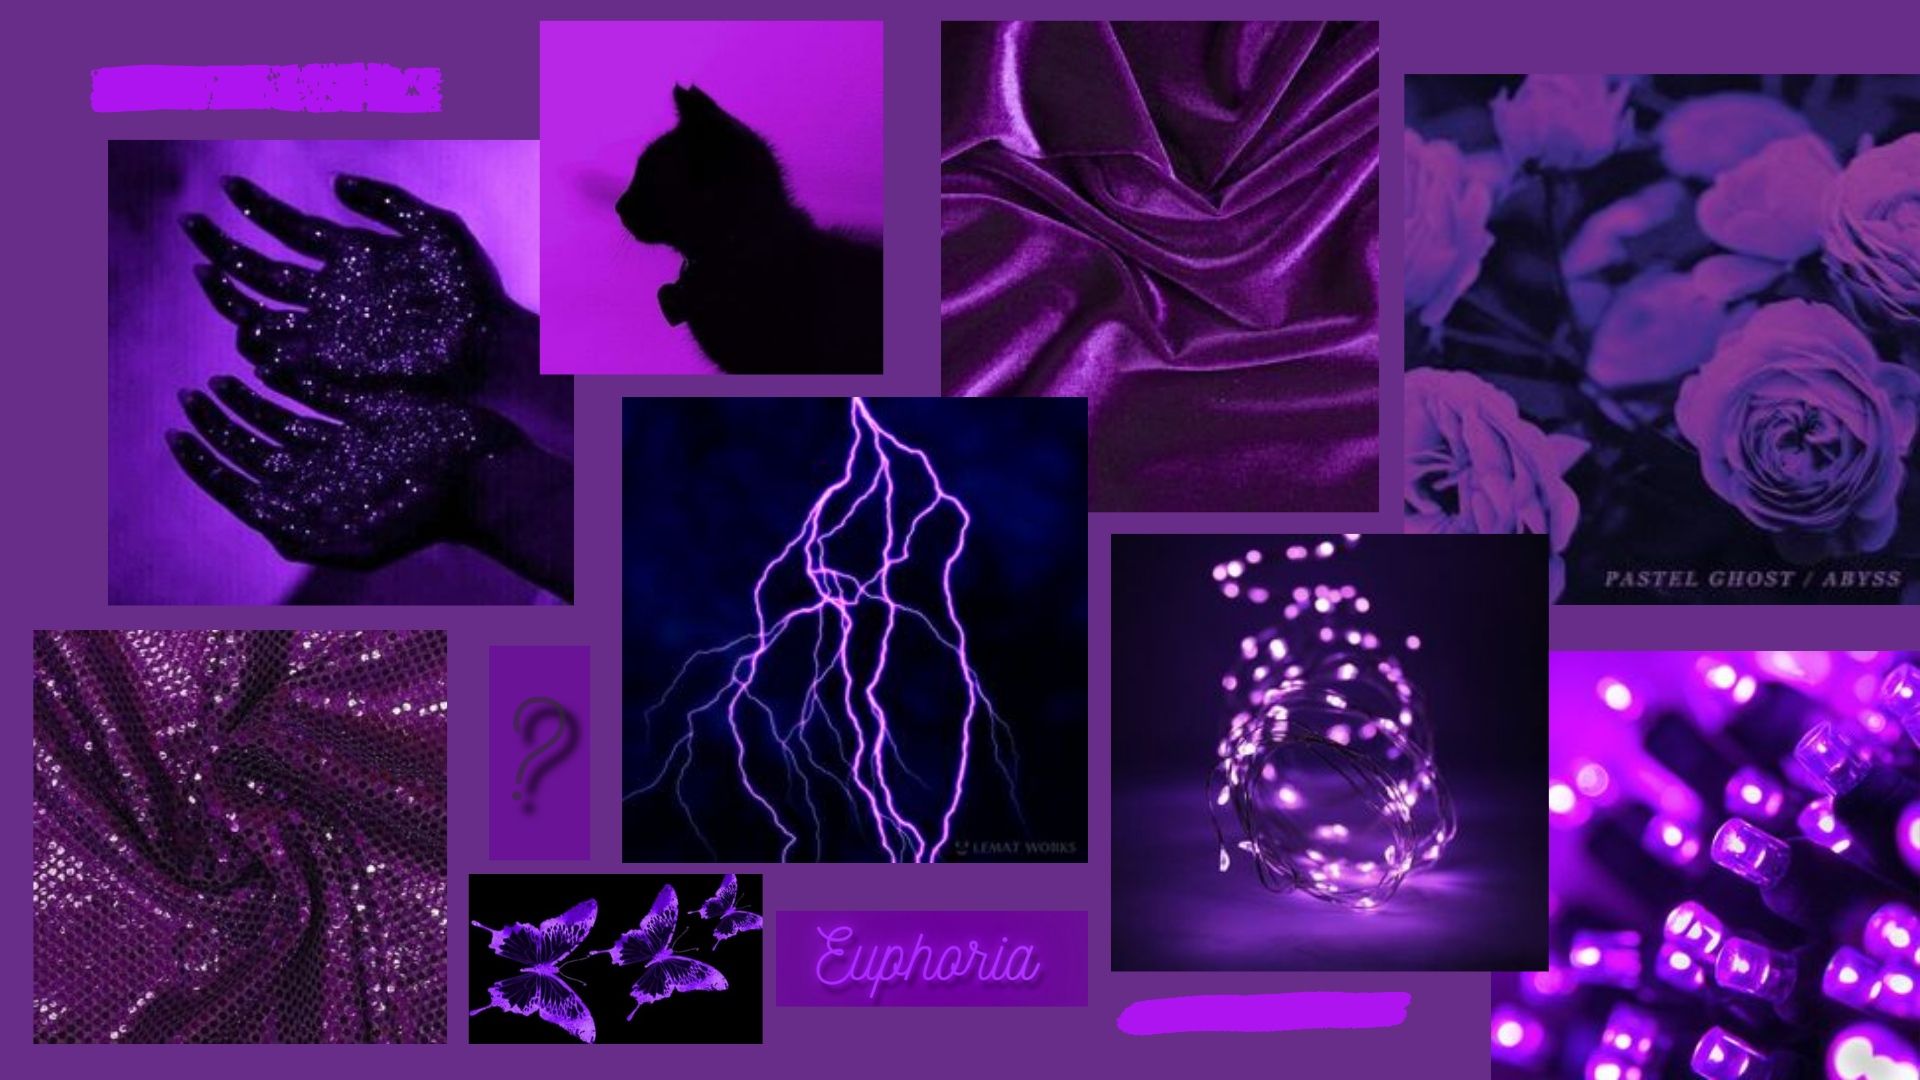 Aesthetic collage of purple images including lightning, roses, and glitter. - Euphoria, purple, violet